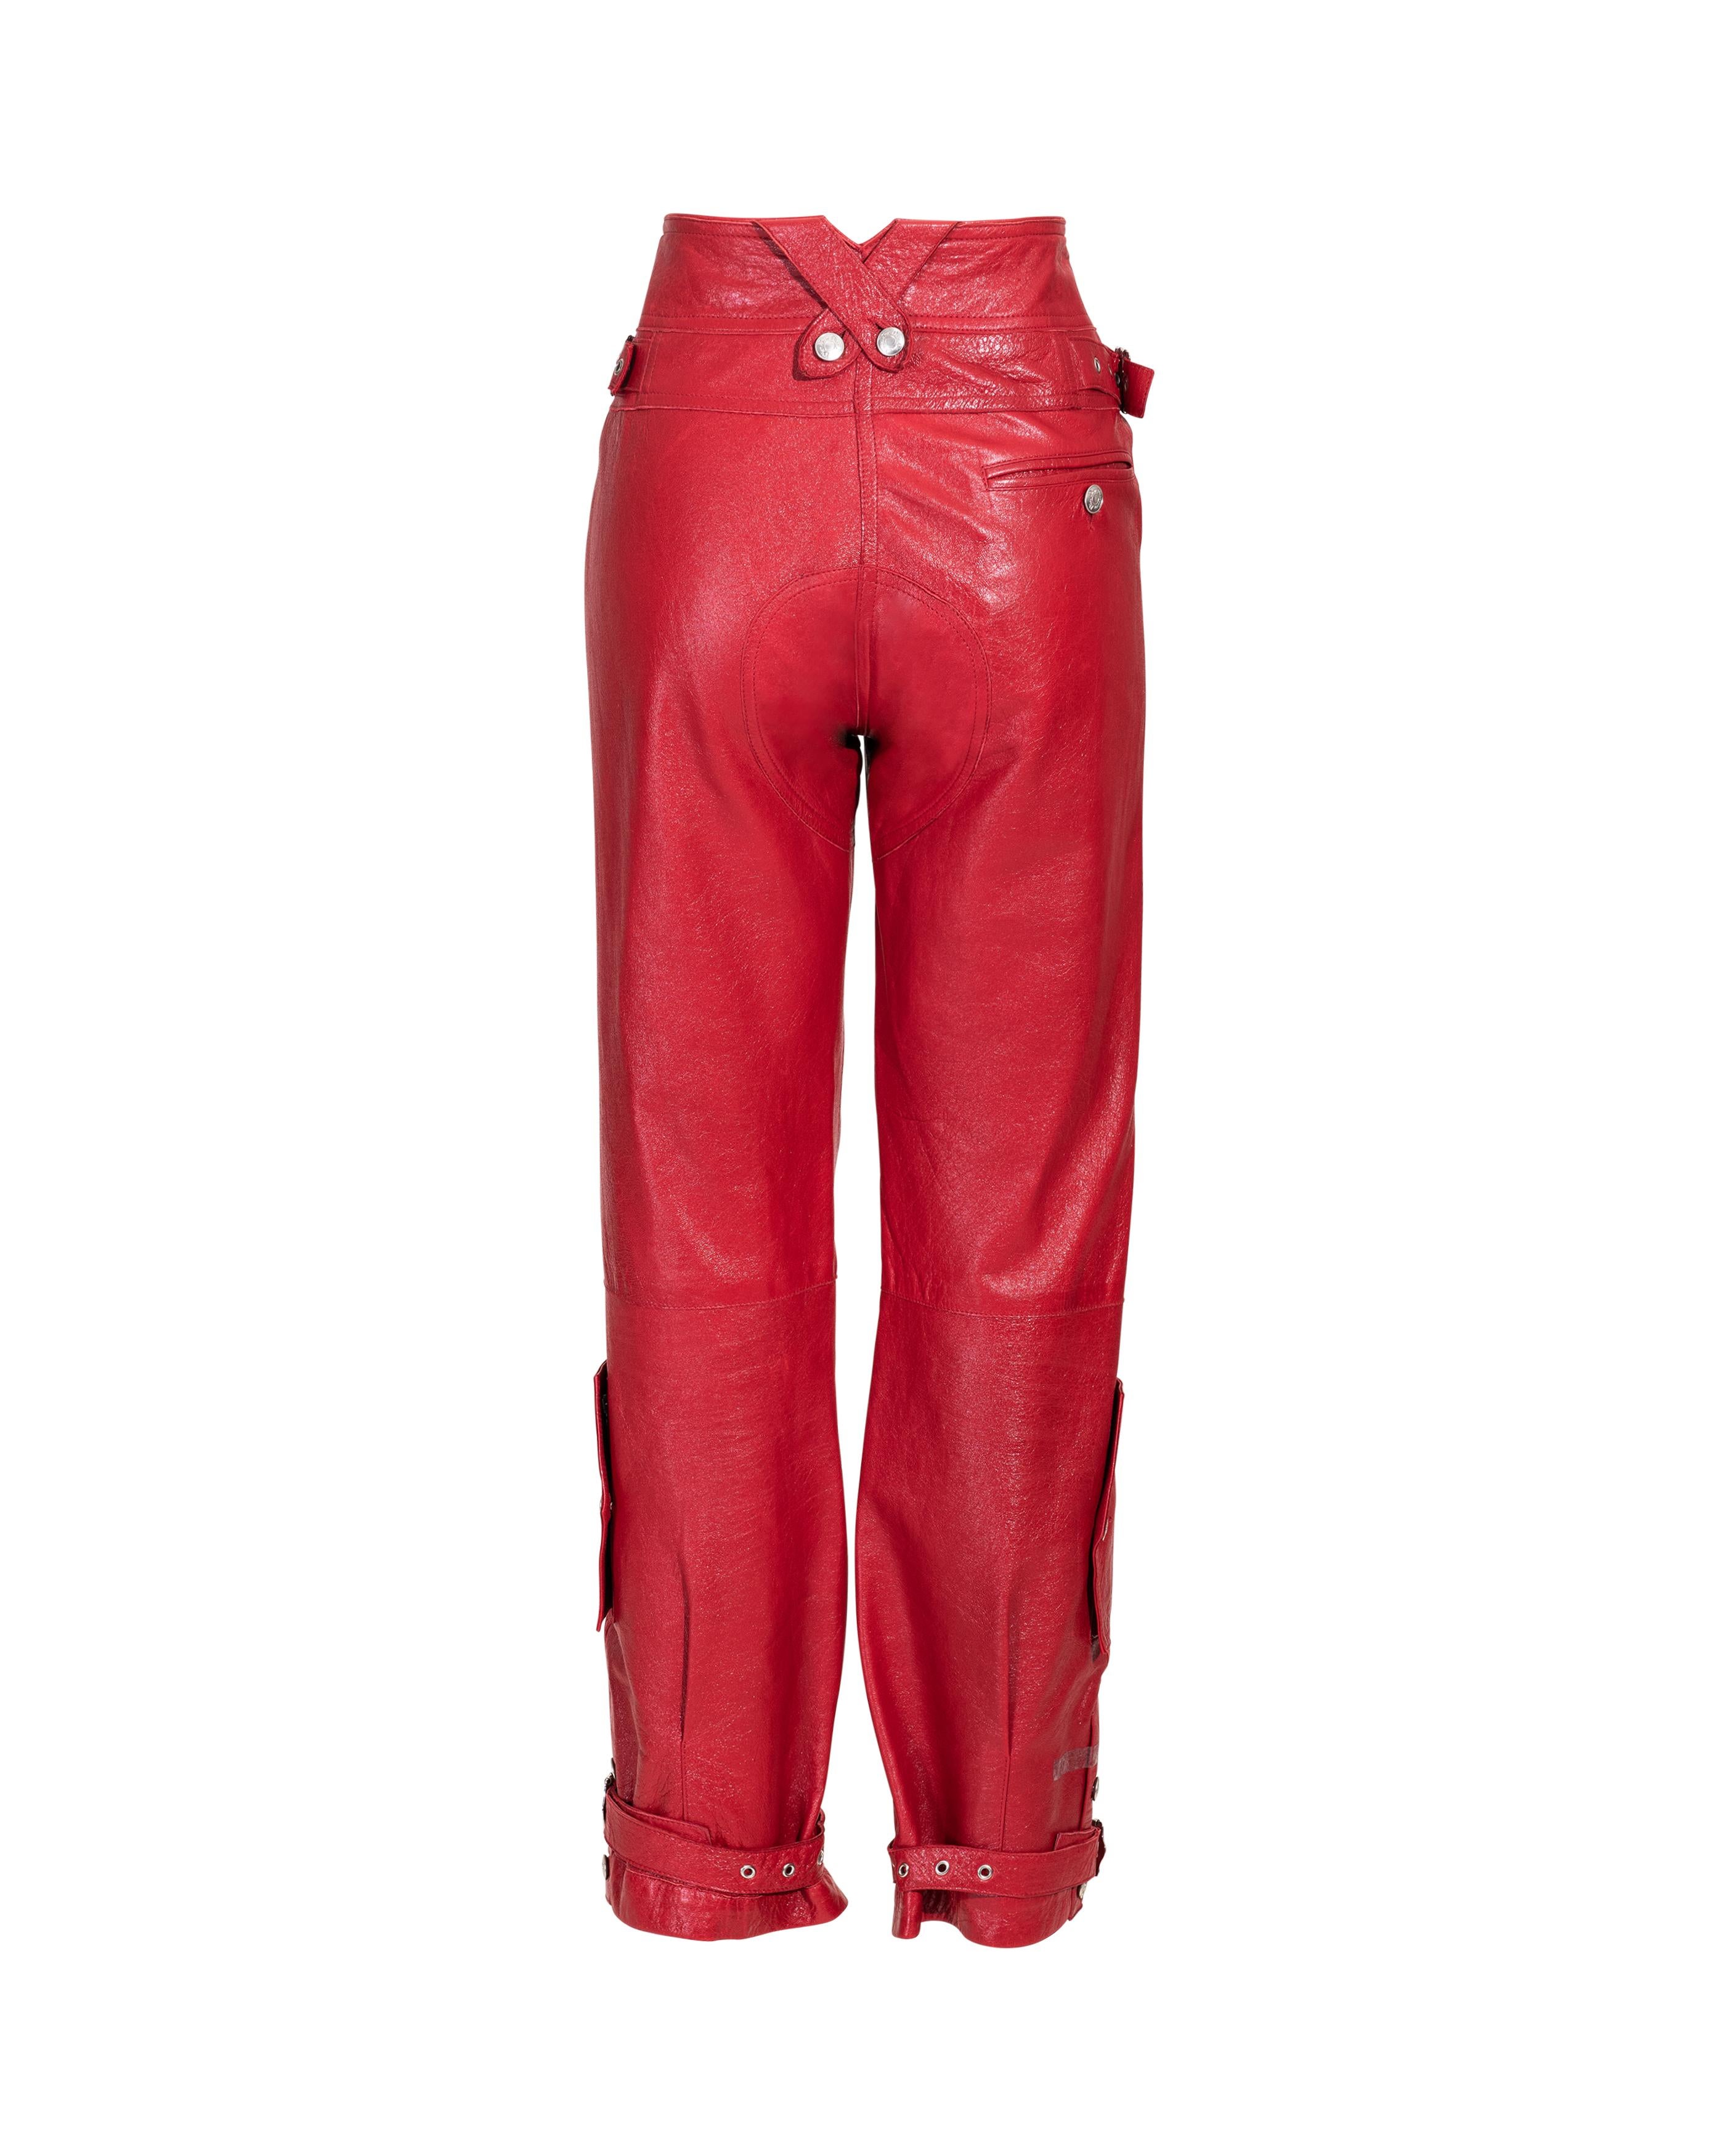 A/W 2003 Christian Dior ‘Hard Core’ Collection Red Leather Pants In Good Condition For Sale In North Hollywood, CA